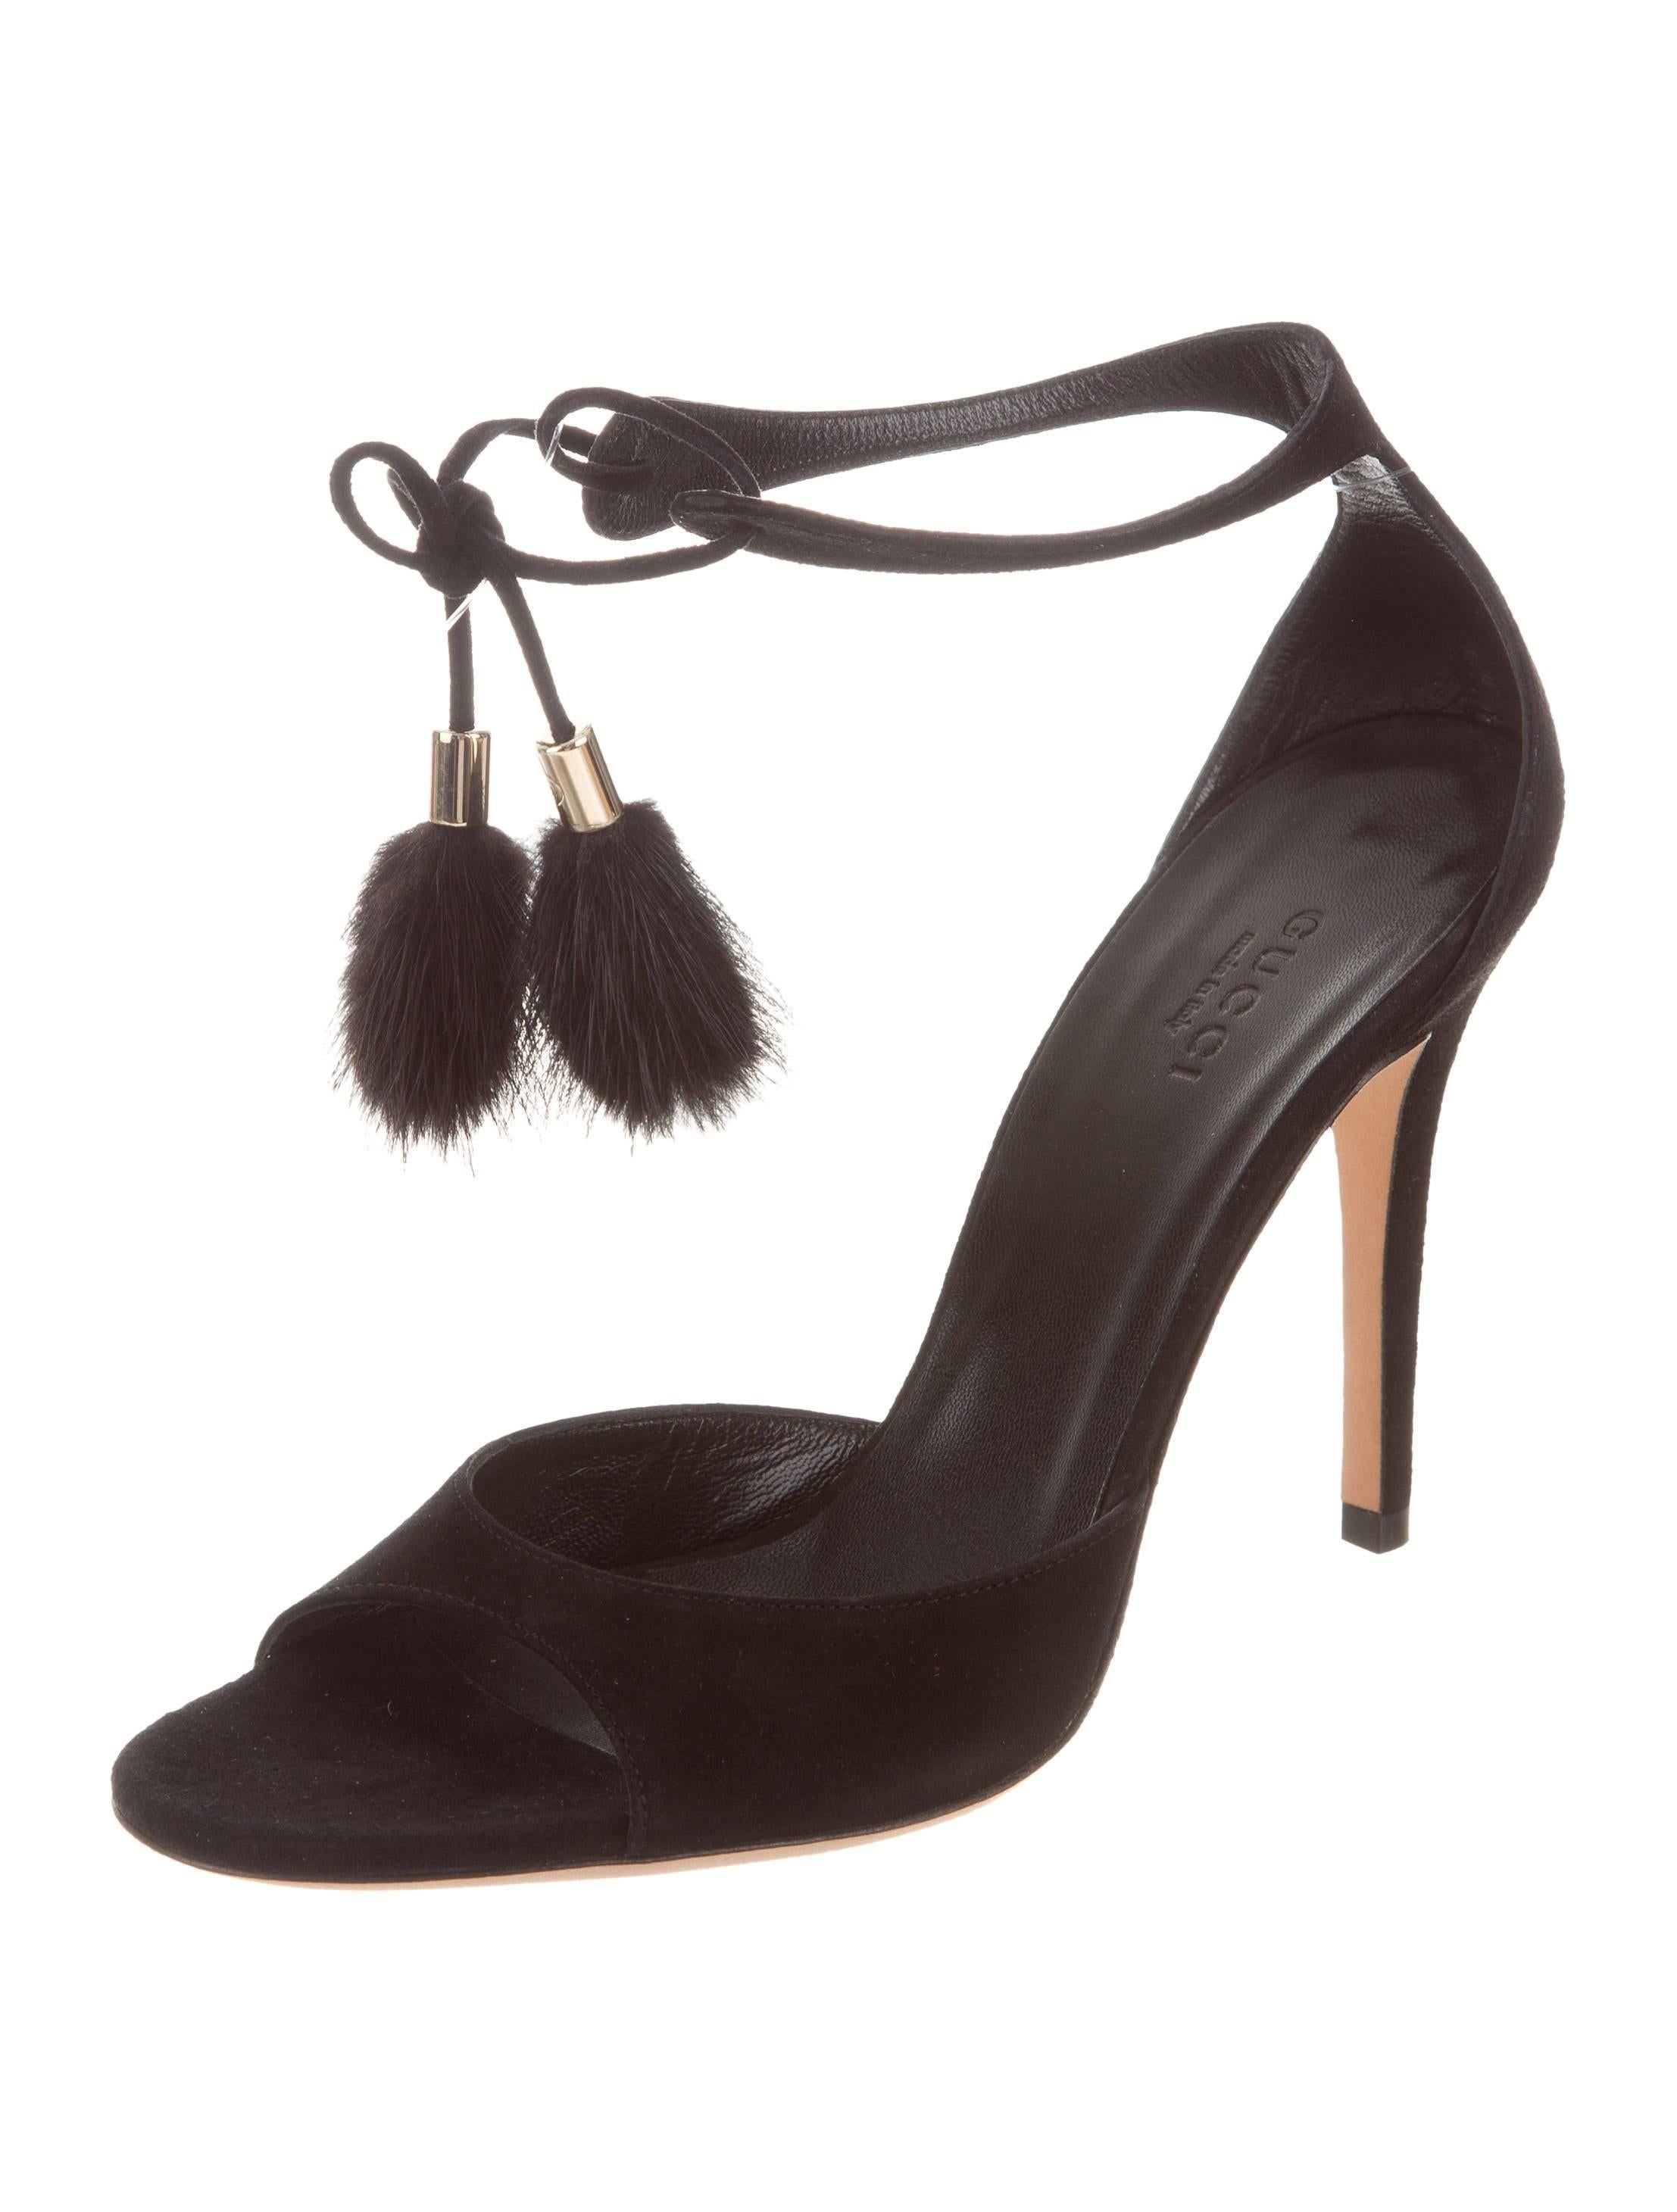 Gucci New Black Fur Pom Pom Evening Sandals Heels in Box

Size IT 36.5
Suede
Fur (Mink)
Ankle tie closure
Made in Italy
Heel height 4"
Includes original Gucci dust bag and box 